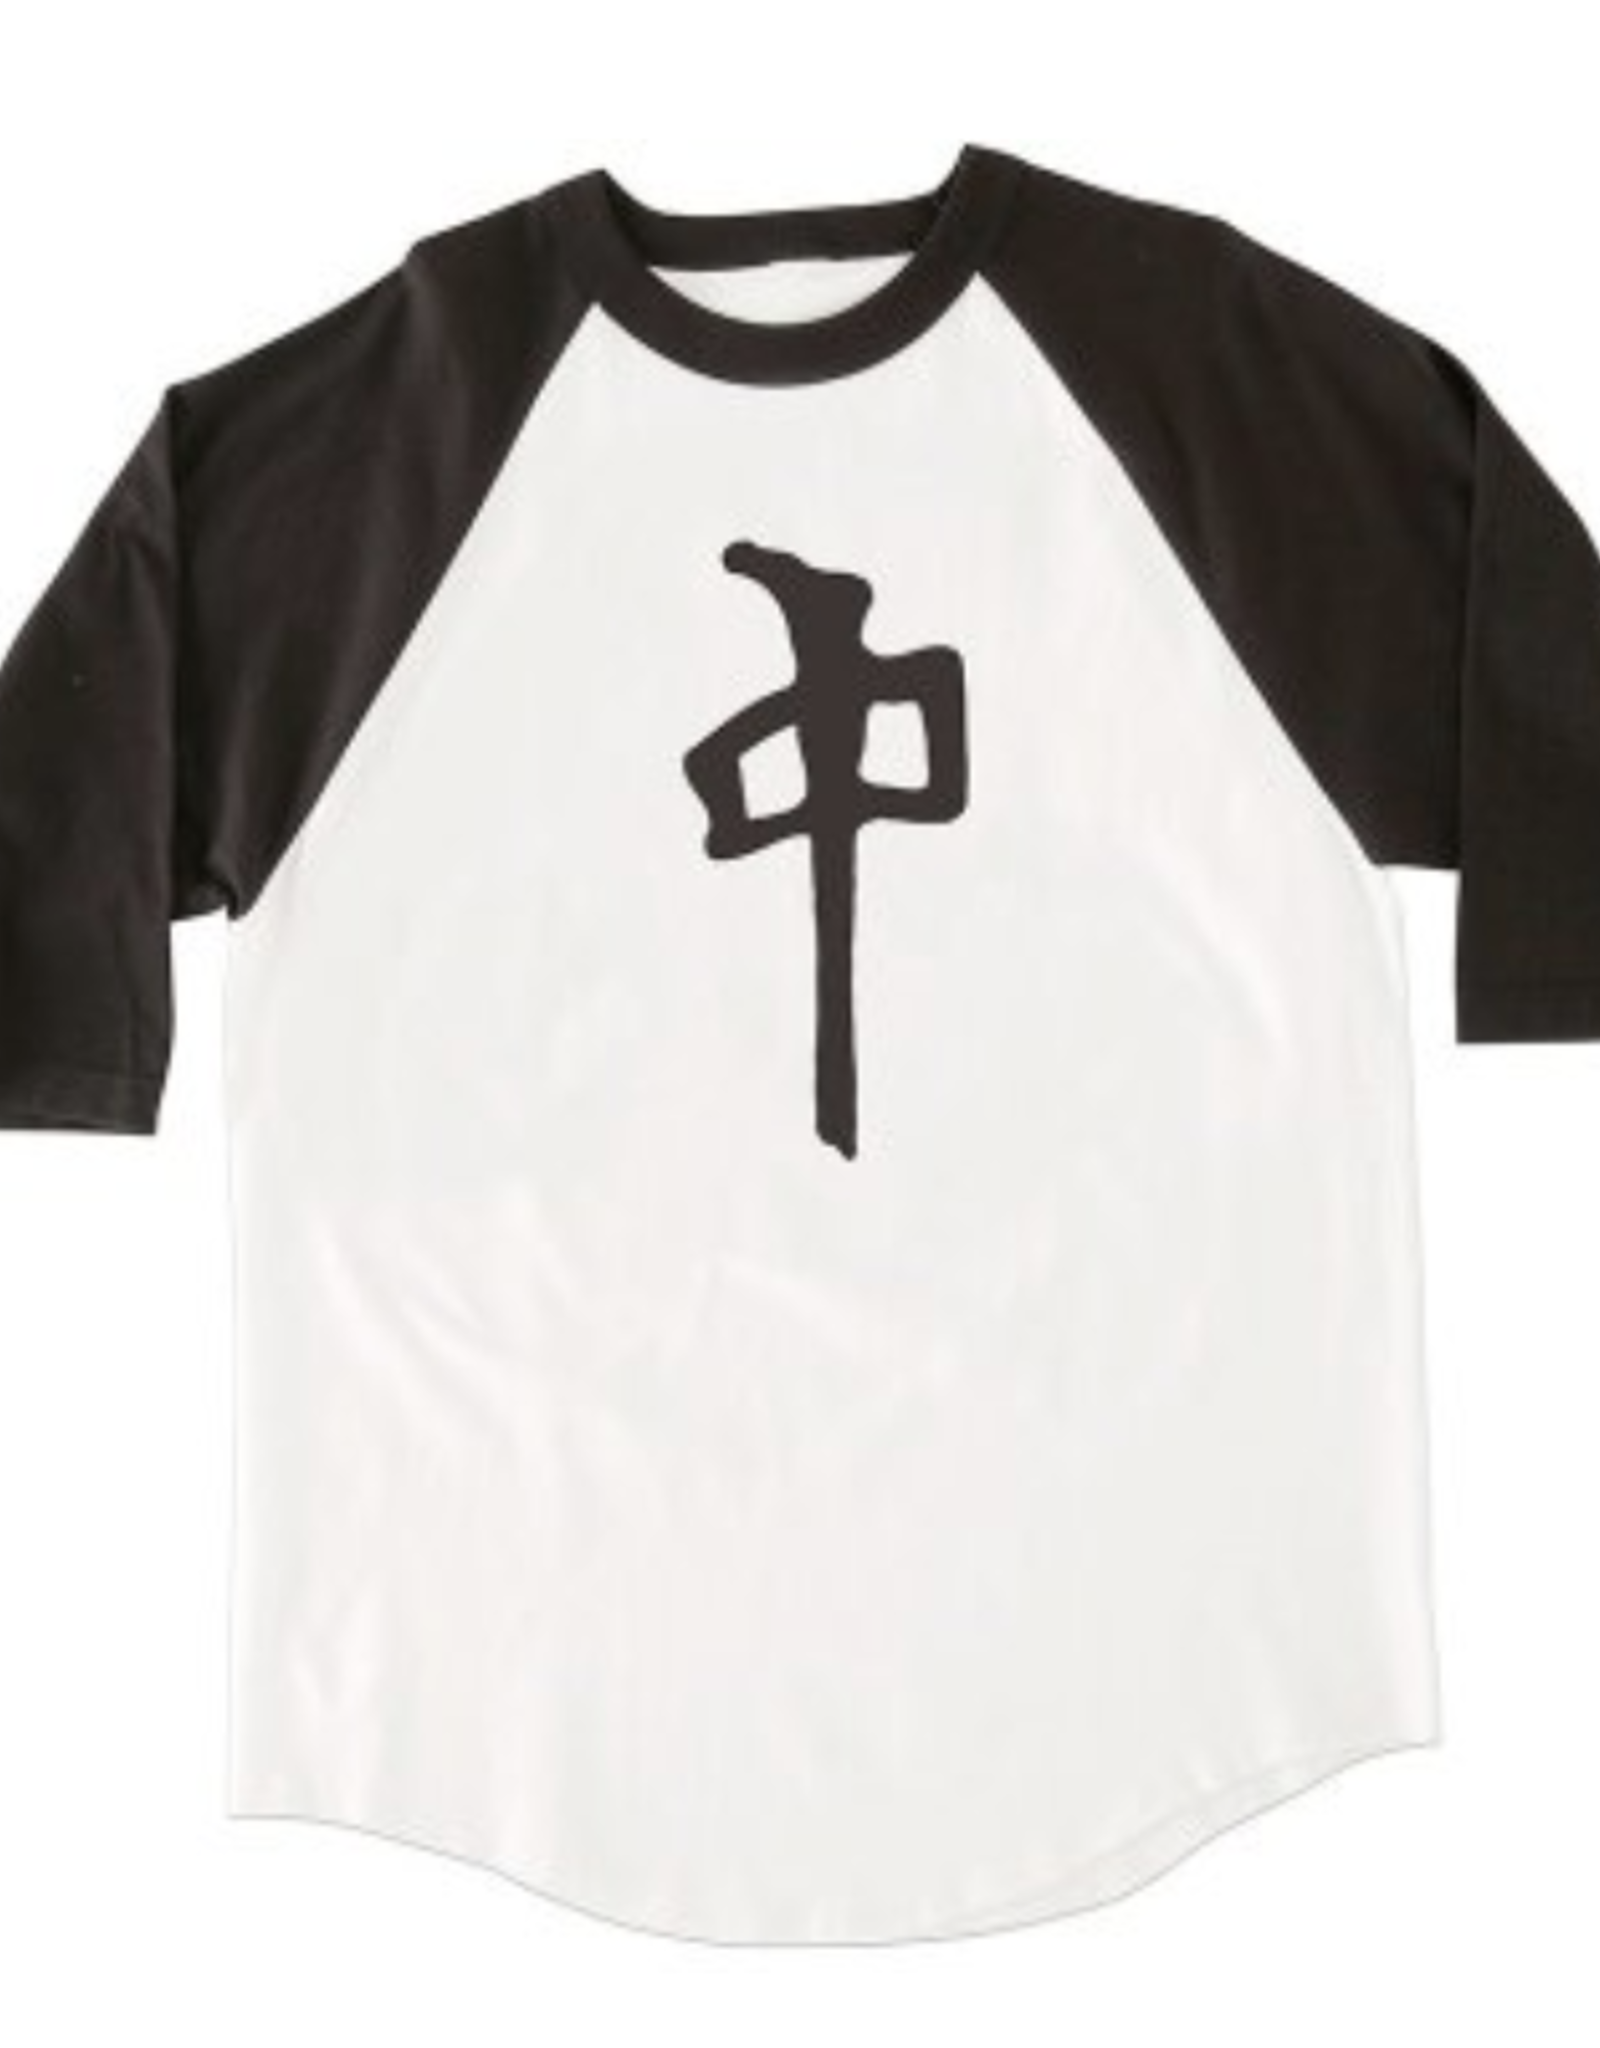 RDS RDS Black/White 3/4 Tee